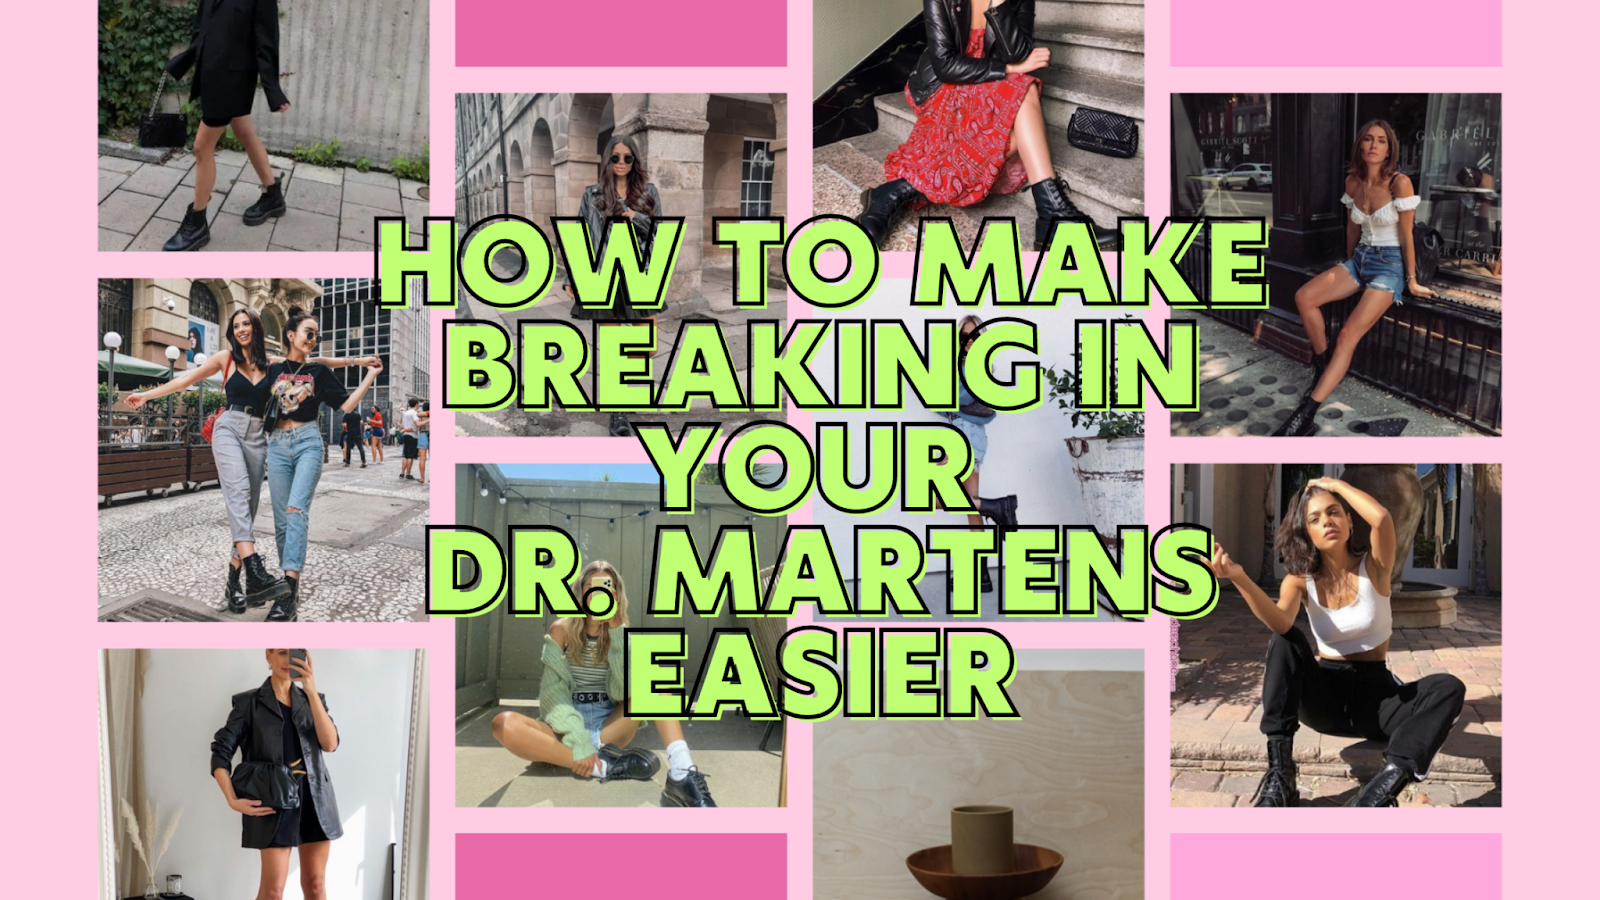 HOW TO MAKE BREAKING IN YOUR DR. MARTENS EASIER